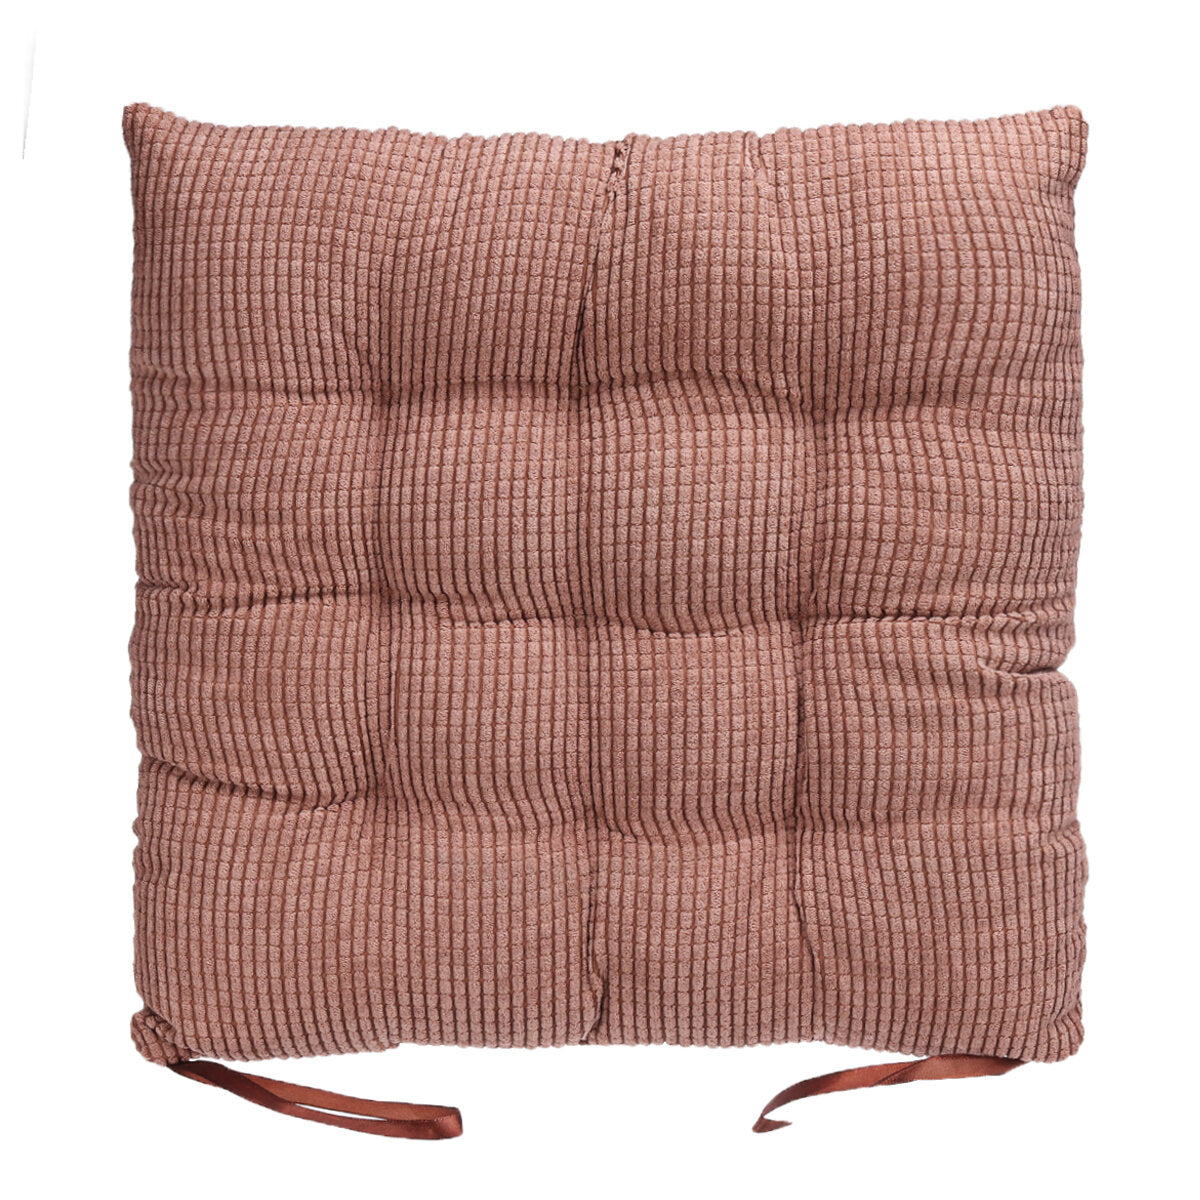 Chair Seat Cushion Square Tatami Dining Chair Mat Buttocks Pillow Chair Car Sofa Soft Seat Pad Home Office Decorations